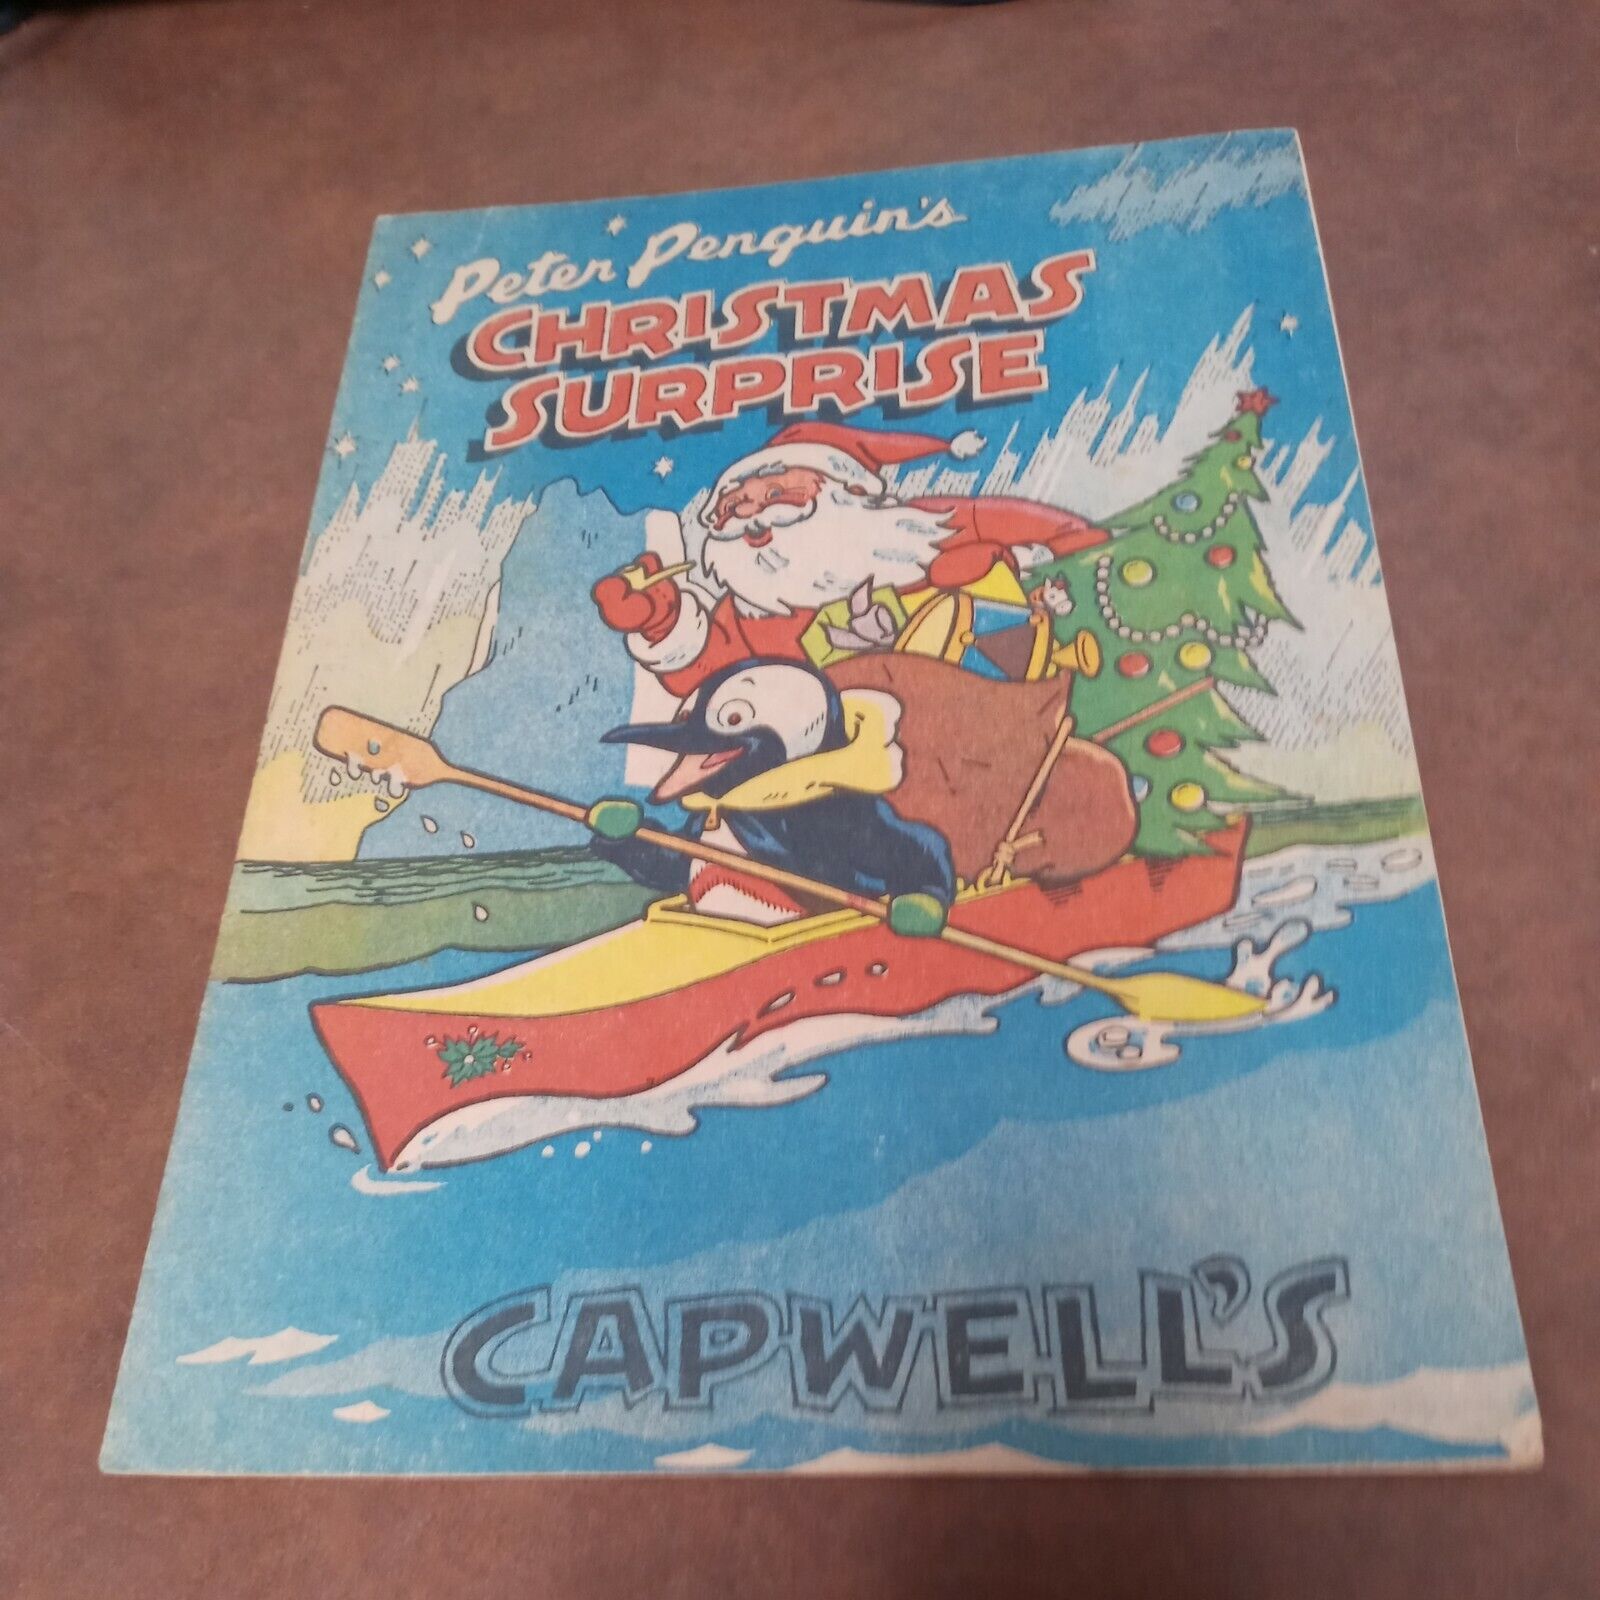 Peter Penguins Christmas Surprise 1965 McCrory McLellan chapwell\'s Stores promo